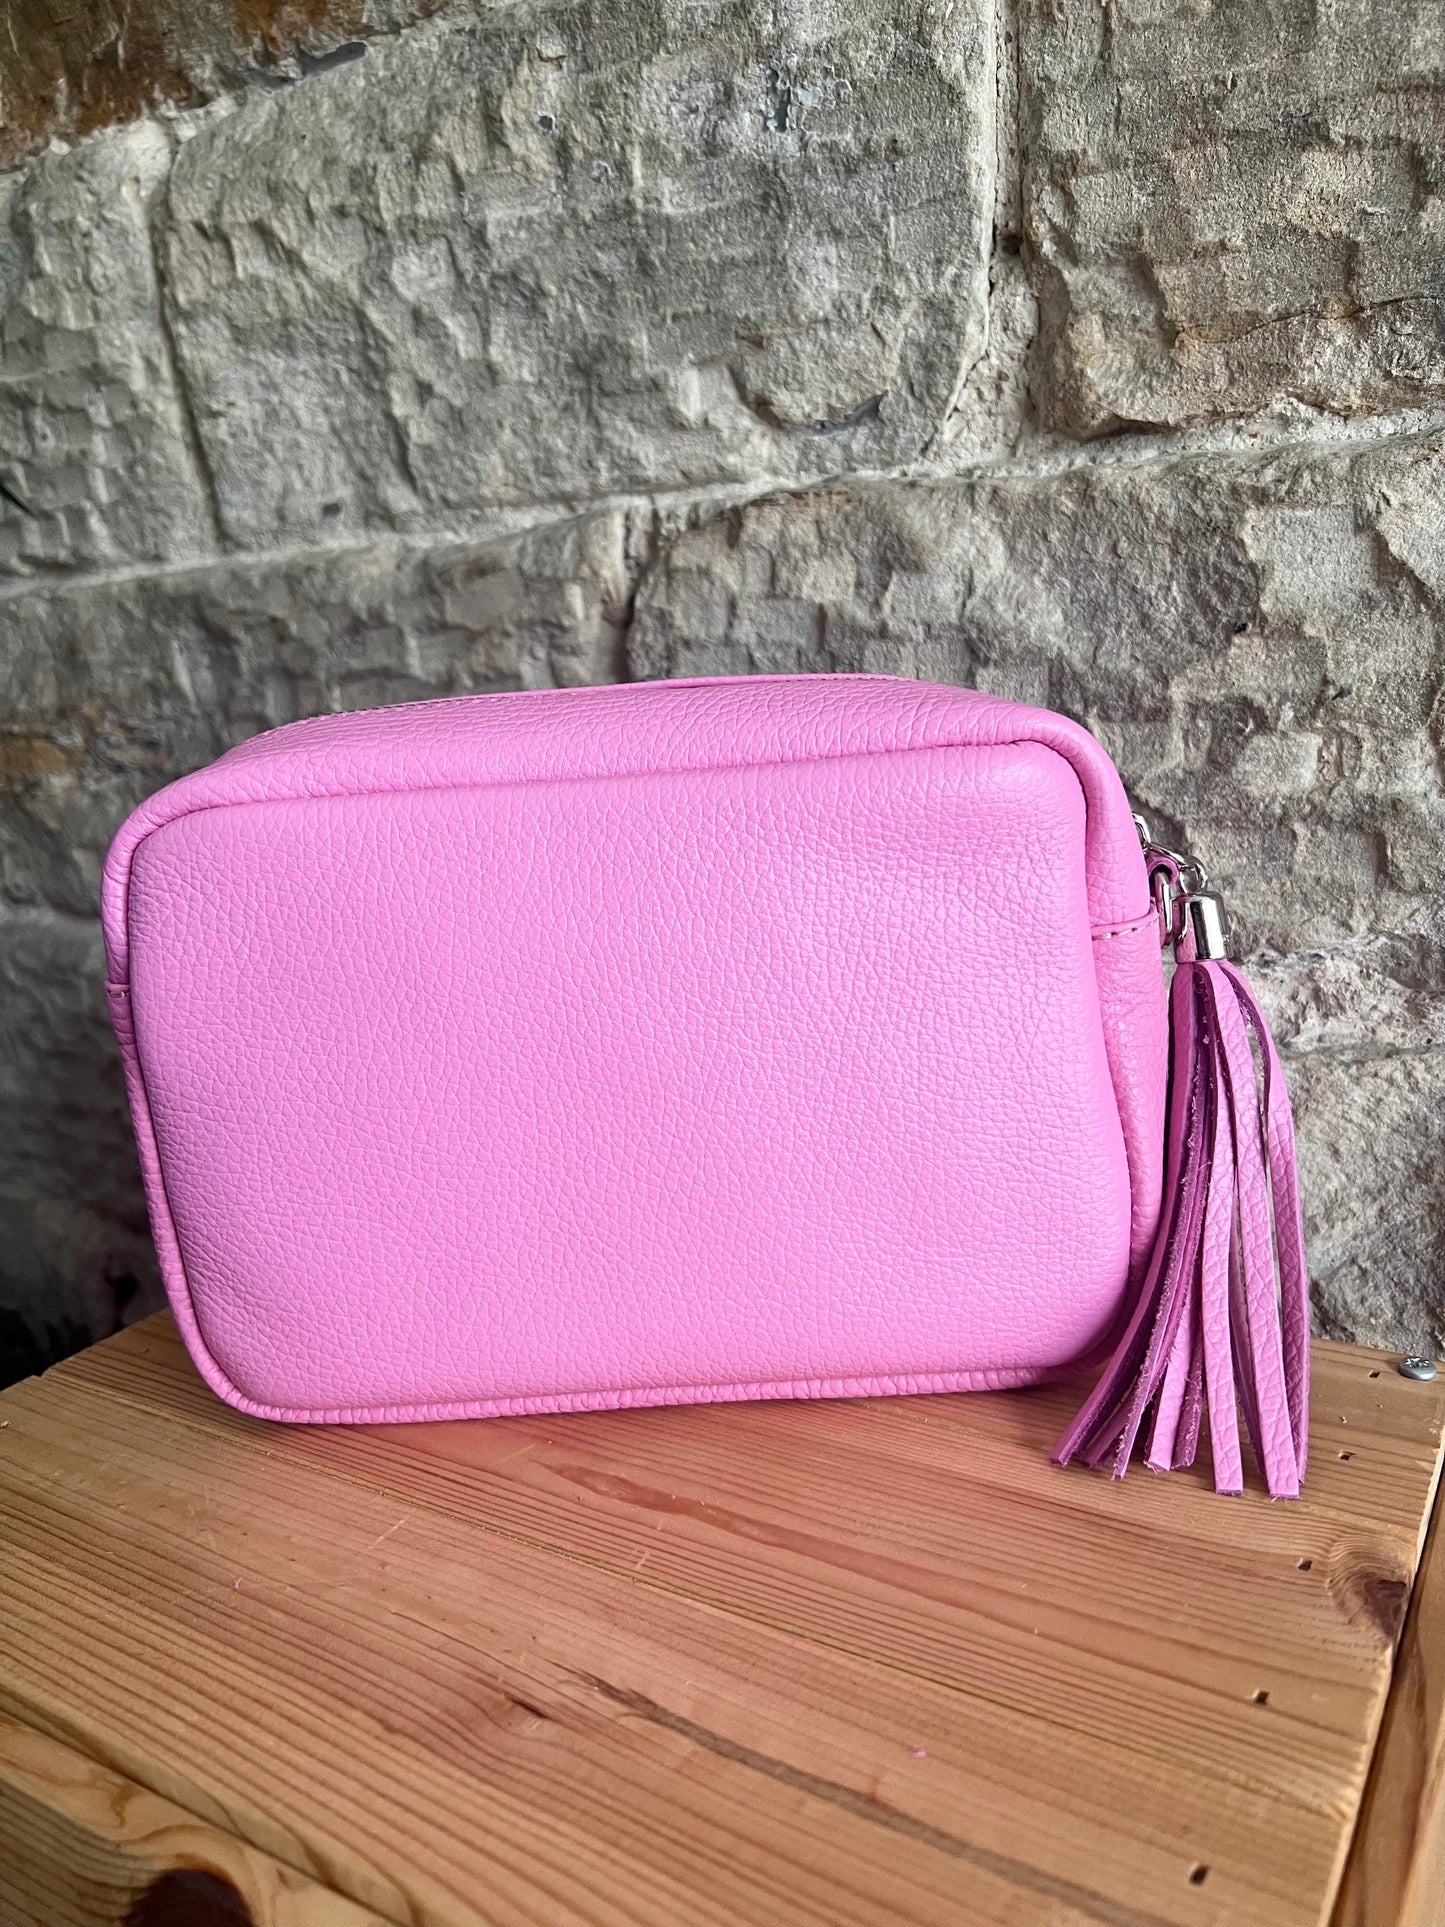 NIKKI - Leather Cross Body 'Camera' Bag with Tassels - Candy Pink